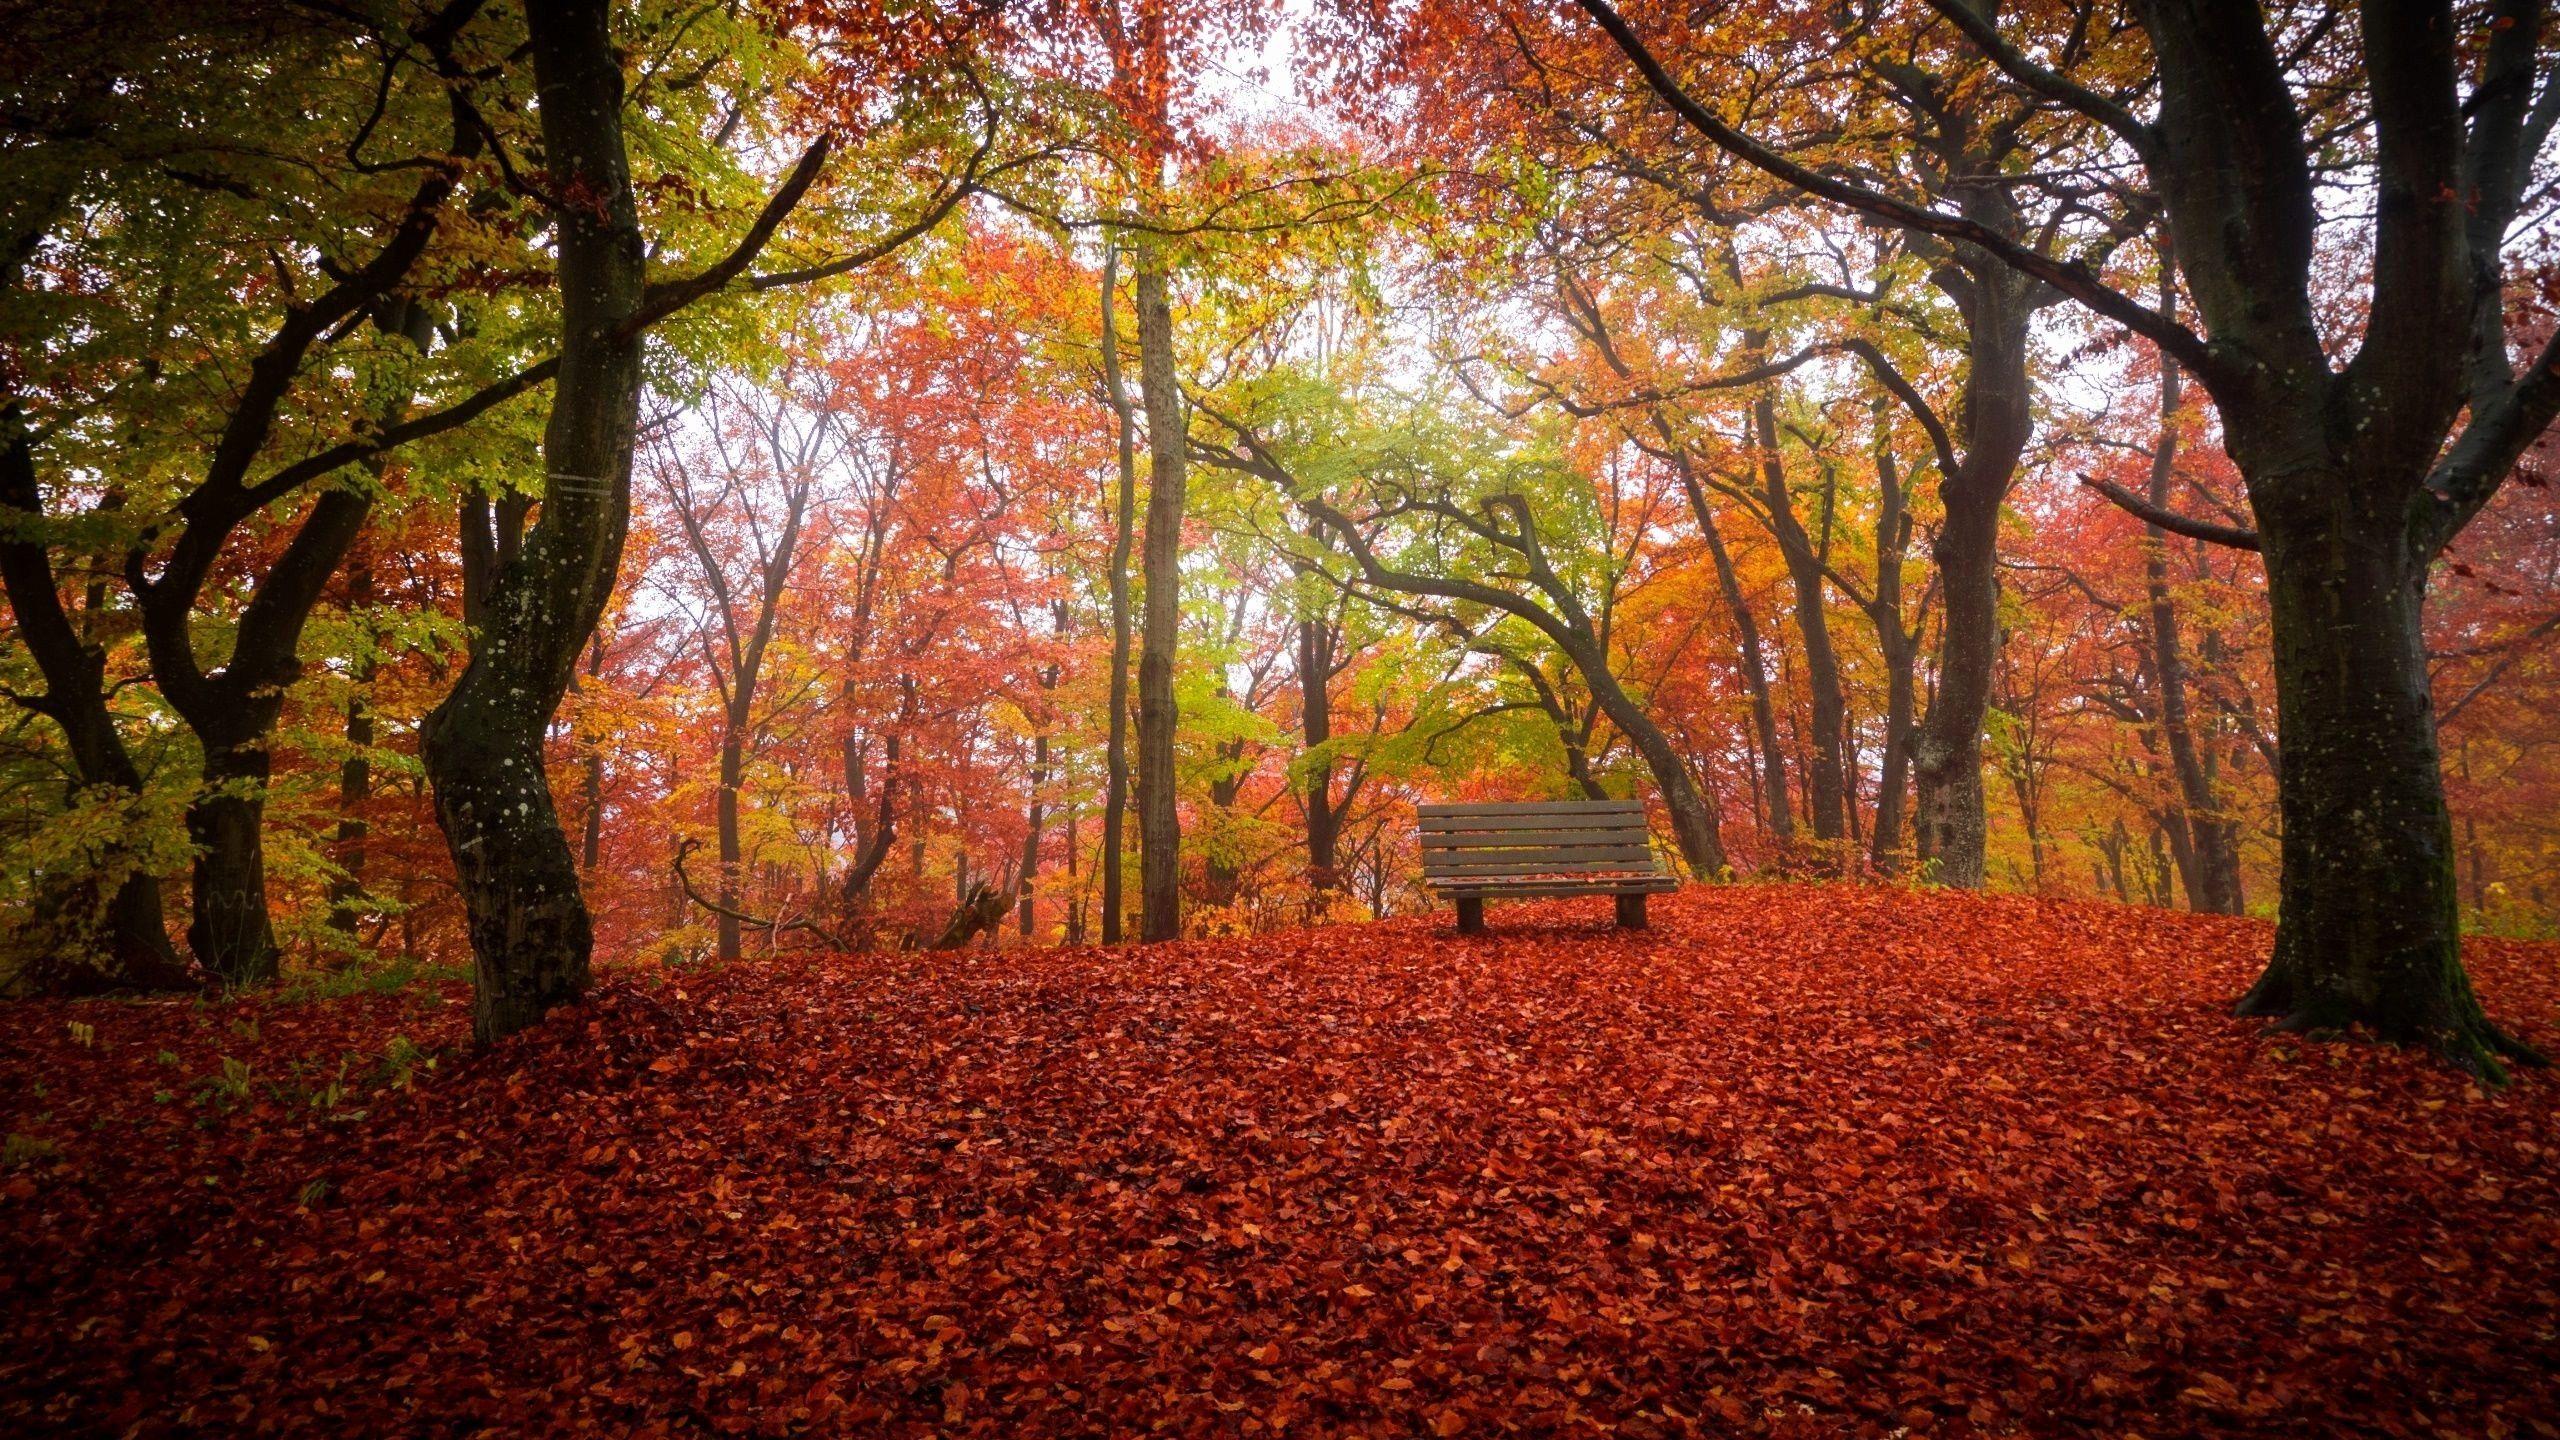 Autumn Forest Wallpaper Natural Awsome Pictureque